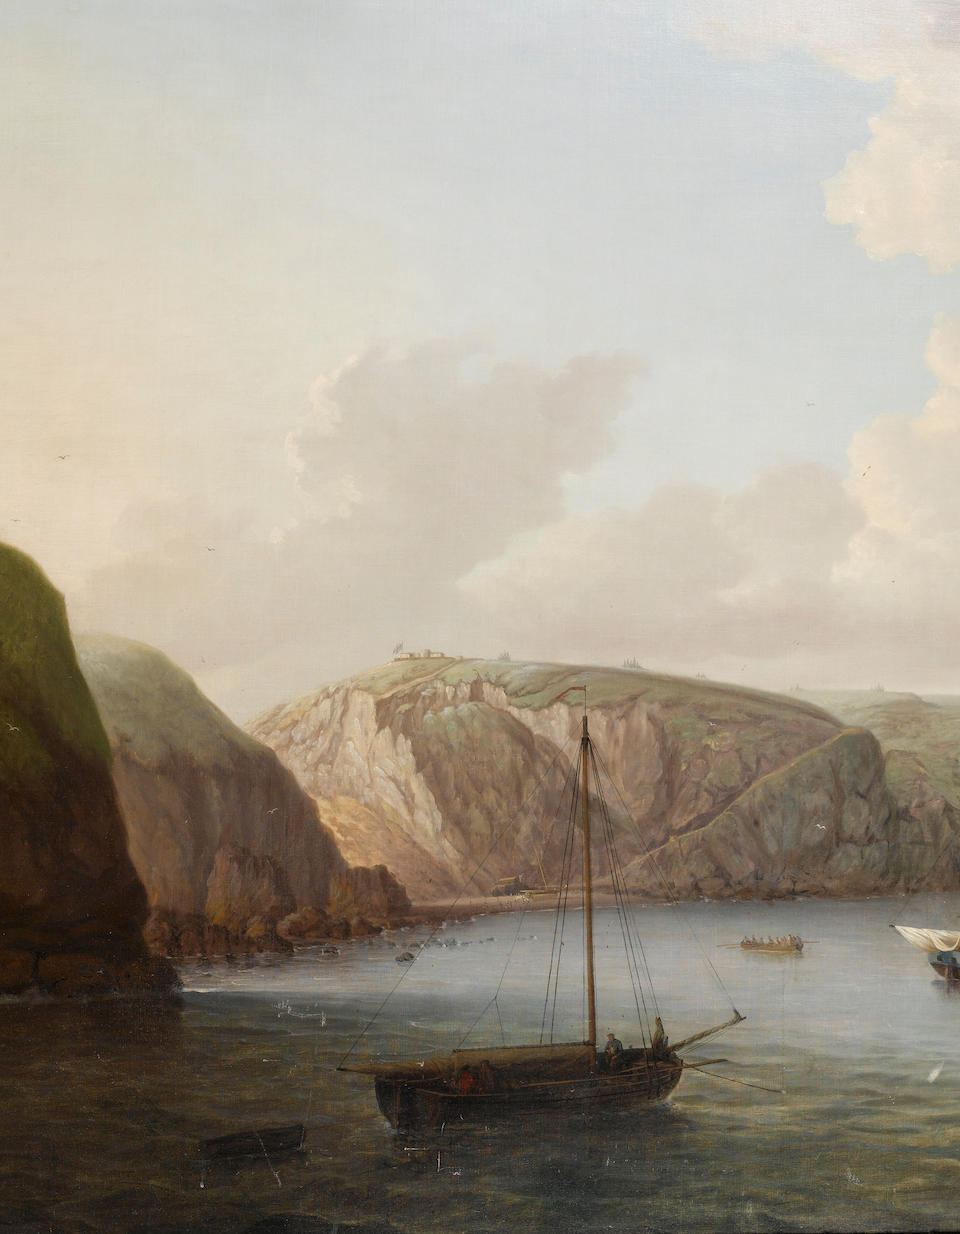 Dominic Serres (British, 1722-1793) 'View of Lundy Island' 153.6 x 247cm. (60 1/2 x 97 1/4in.)